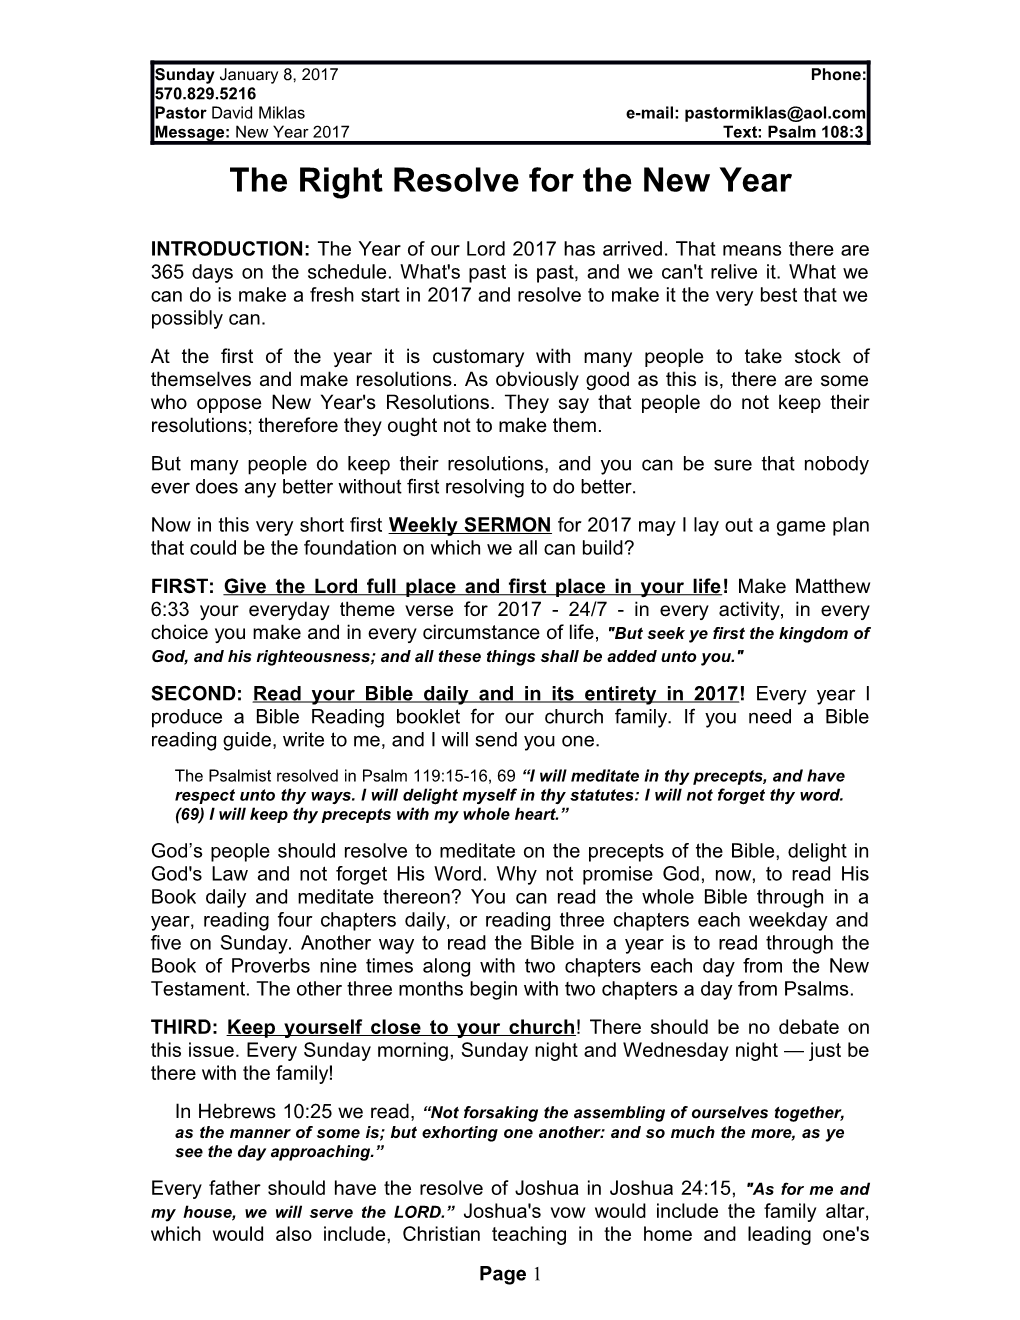 The Right Resolve for the New Year